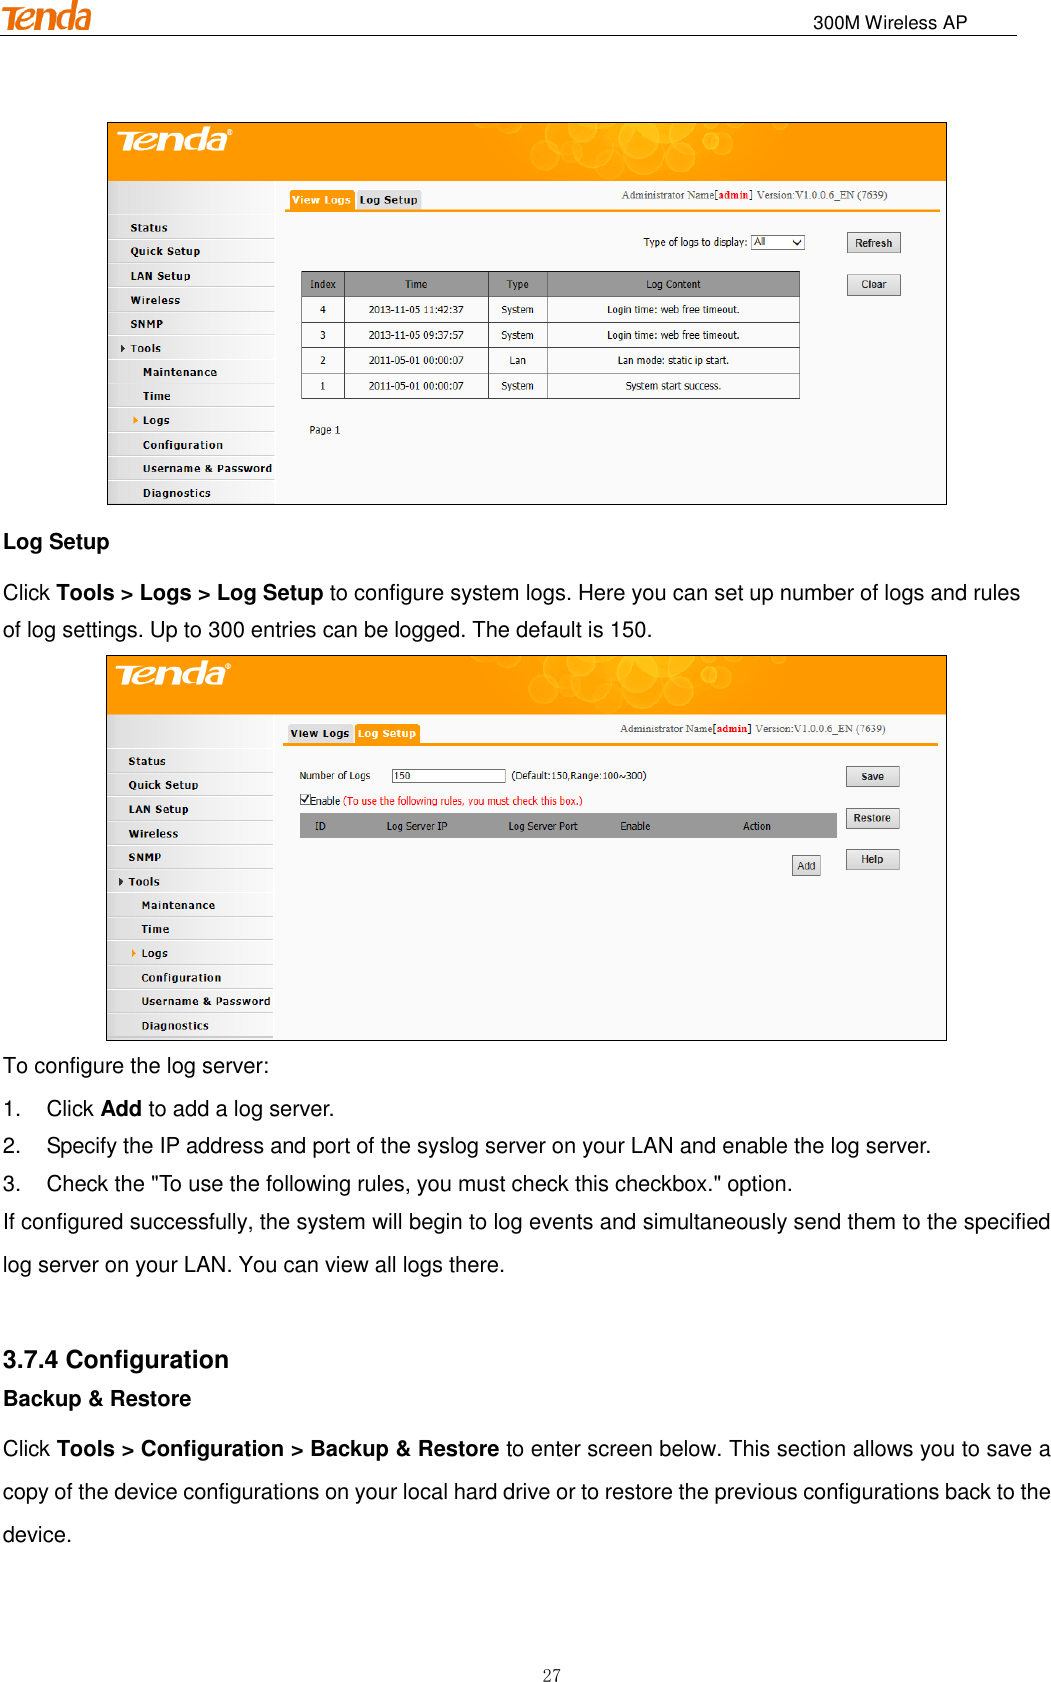                                                                              300M Wireless AP 27  Log Setup Click Tools &gt; Logs &gt; Log Setup to configure system logs. Here you can set up number of logs and rules of log settings. Up to 300 entries can be logged. The default is 150.  To configure the log server: 1.  Click Add to add a log server. 2.  Specify the IP address and port of the syslog server on your LAN and enable the log server. 3.  Check the &quot;To use the following rules, you must check this checkbox.&quot; option. If configured successfully, the system will begin to log events and simultaneously send them to the specified log server on your LAN. You can view all logs there.  3.7.4 Configuration Backup &amp; Restore Click Tools &gt; Configuration &gt; Backup &amp; Restore to enter screen below. This section allows you to save a copy of the device configurations on your local hard drive or to restore the previous configurations back to the device. 